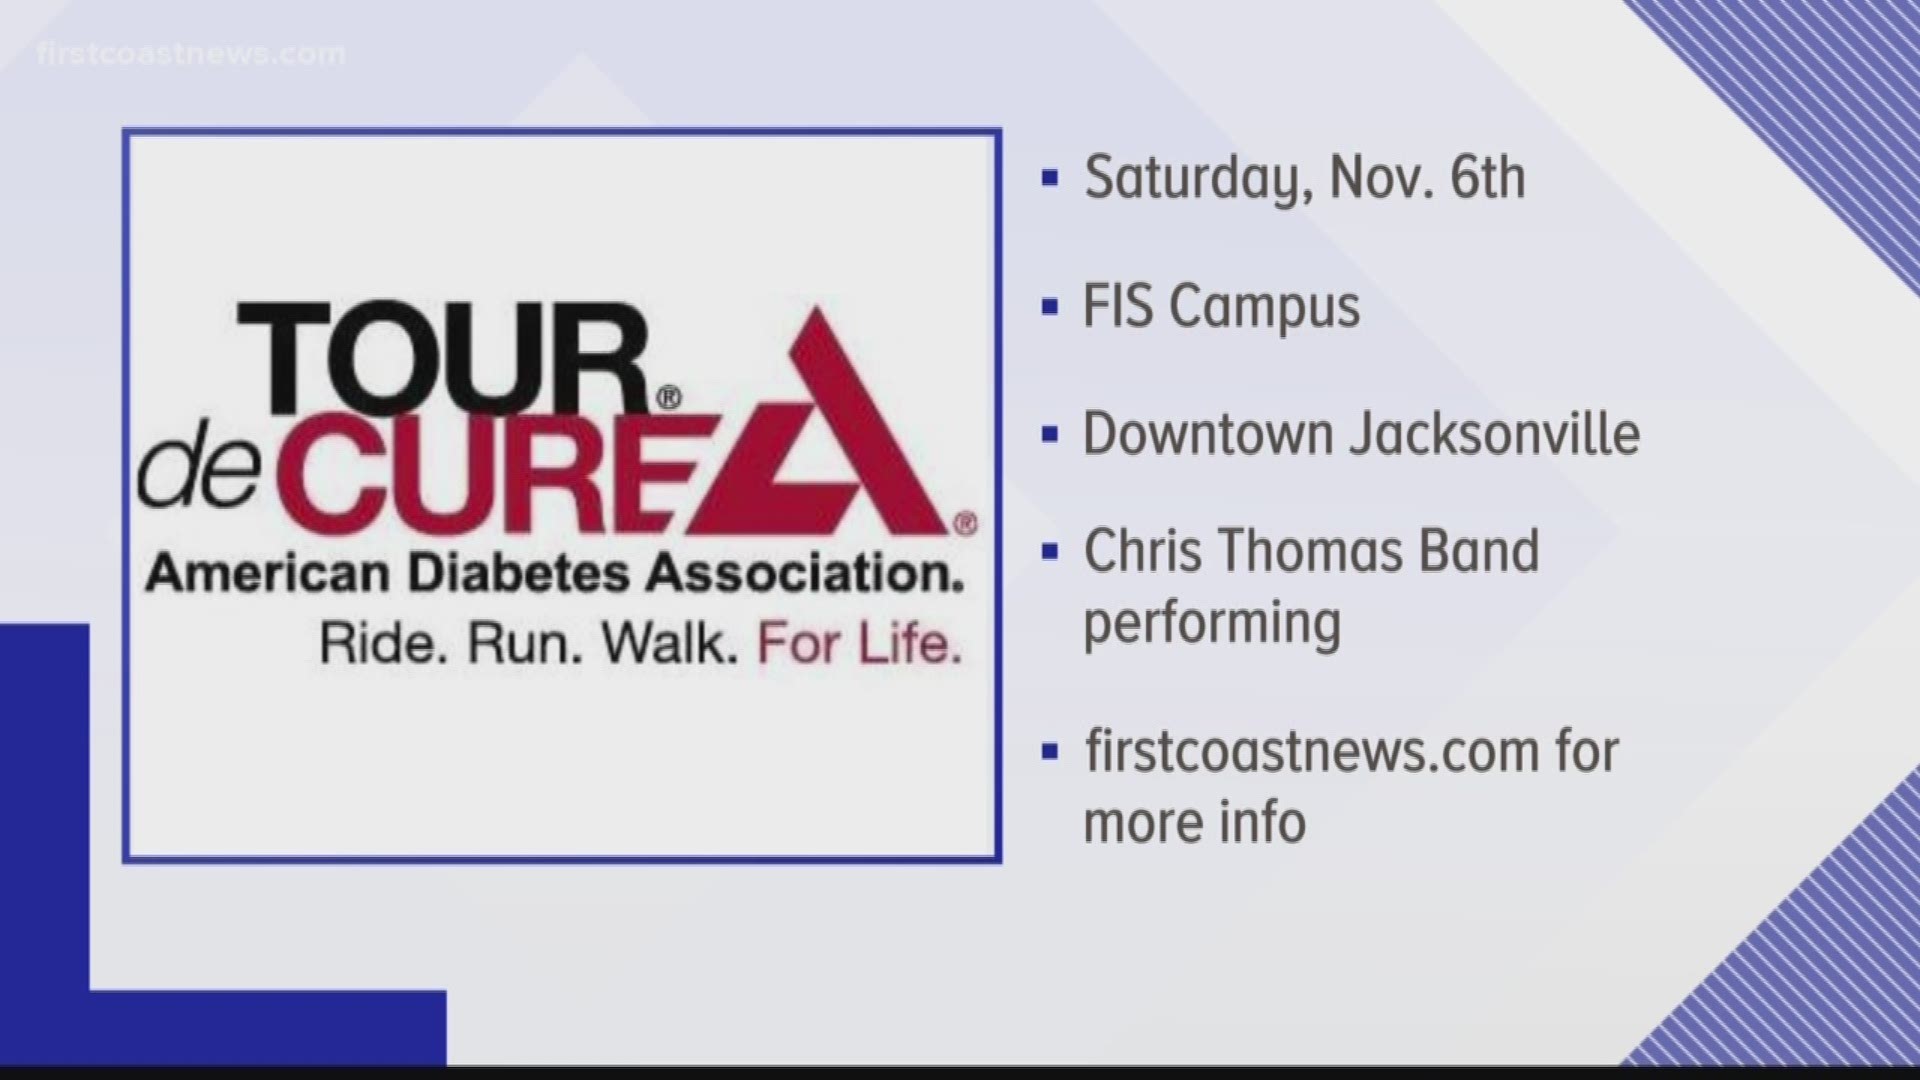 Tour de Cure seeks to raise needed funds and awareness for diabetes, which is currently America’s #1 chronic health crisis.